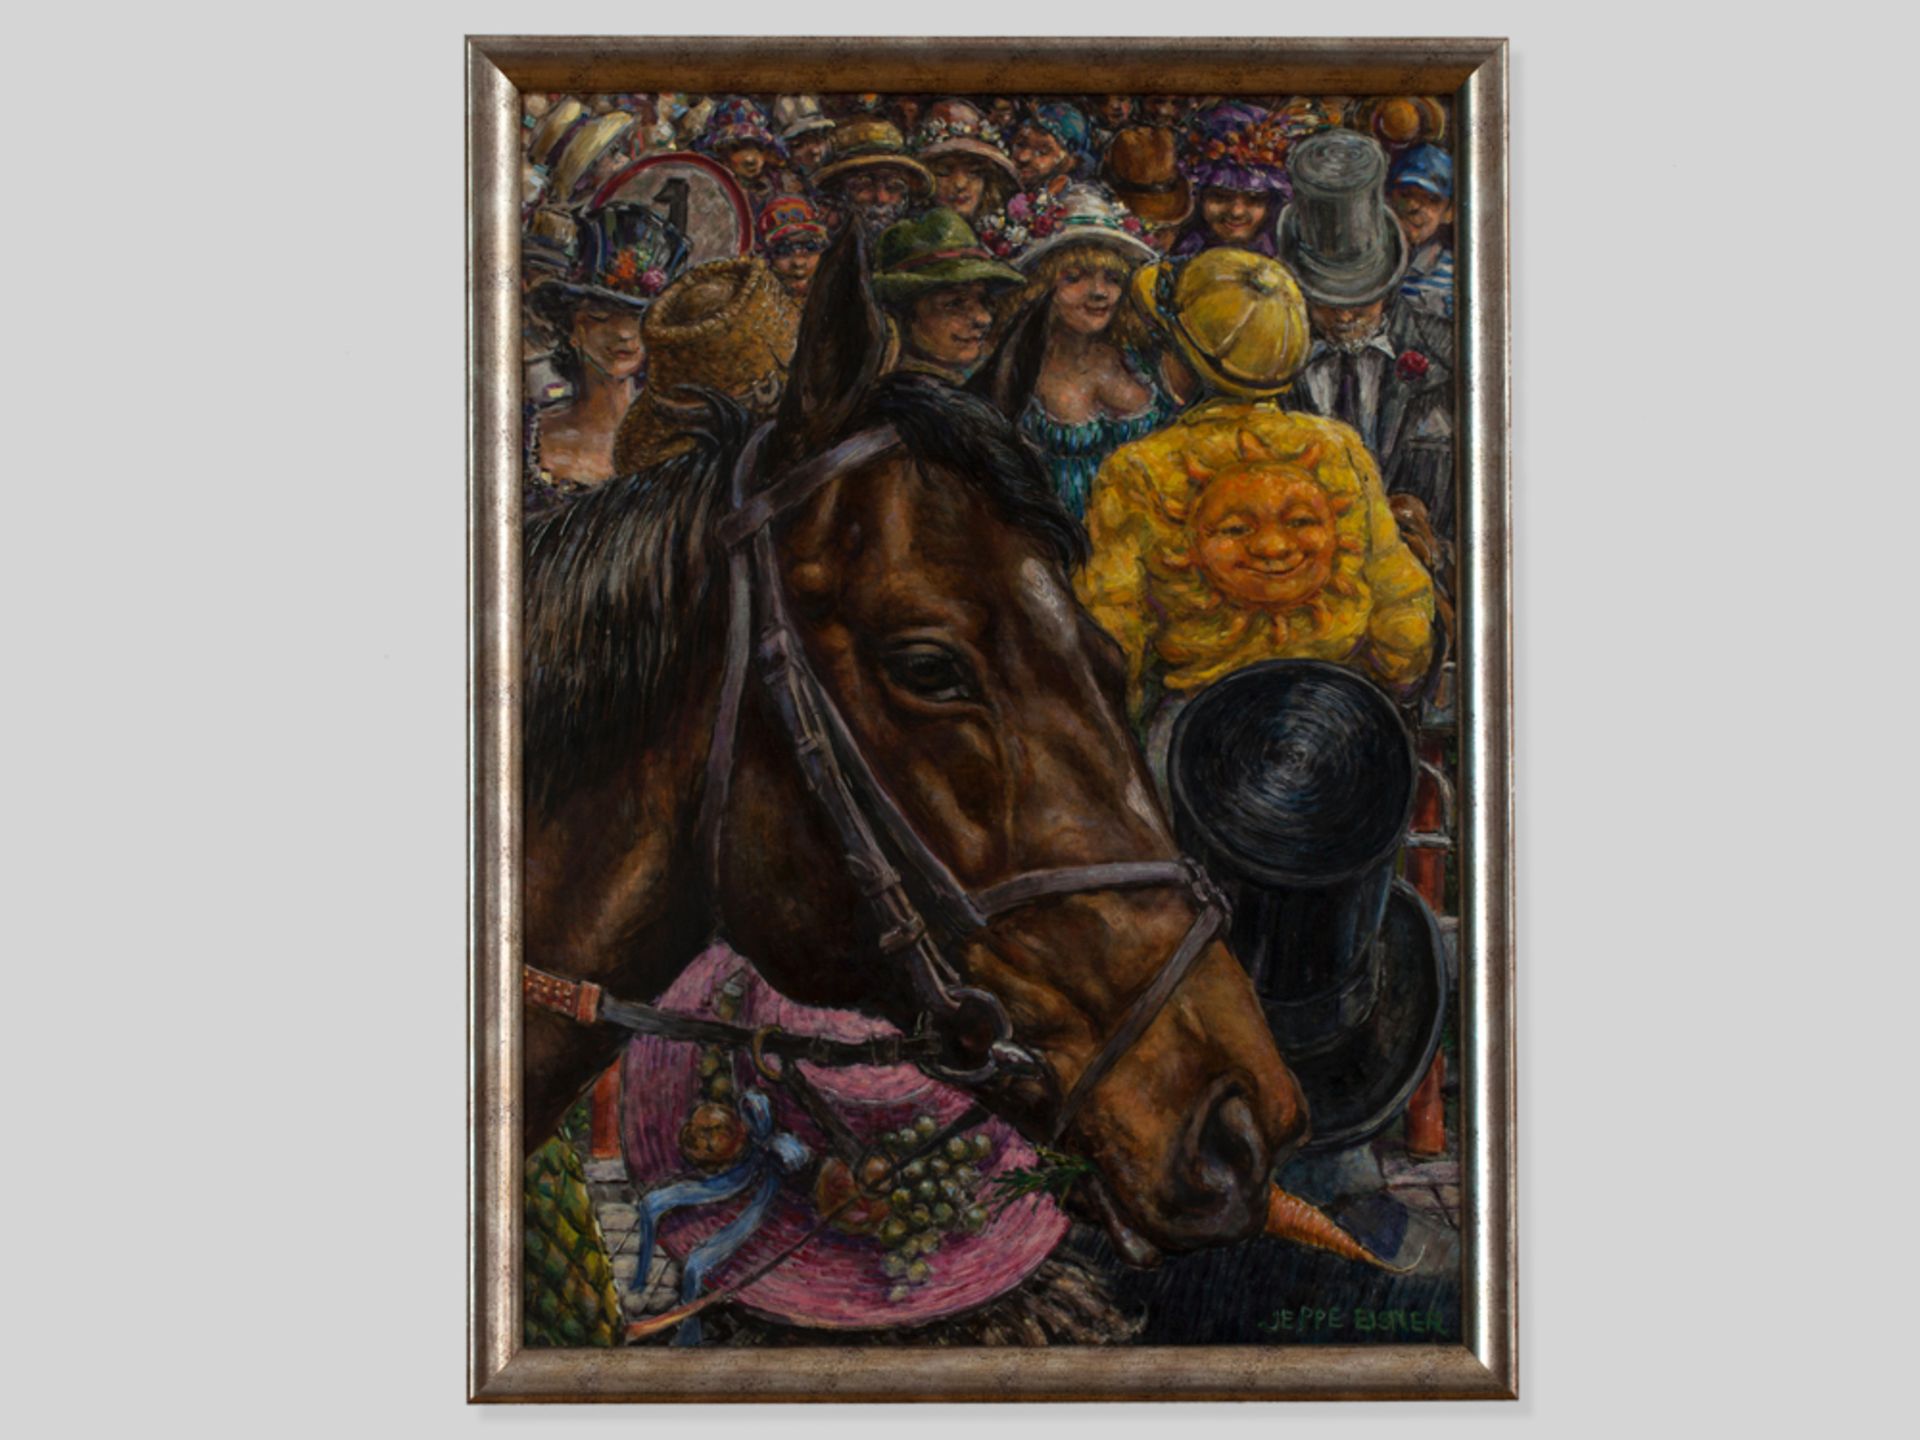 Oil on canvas Danish Derby by Jeppe Eisner, 2009 - Image 2 of 5